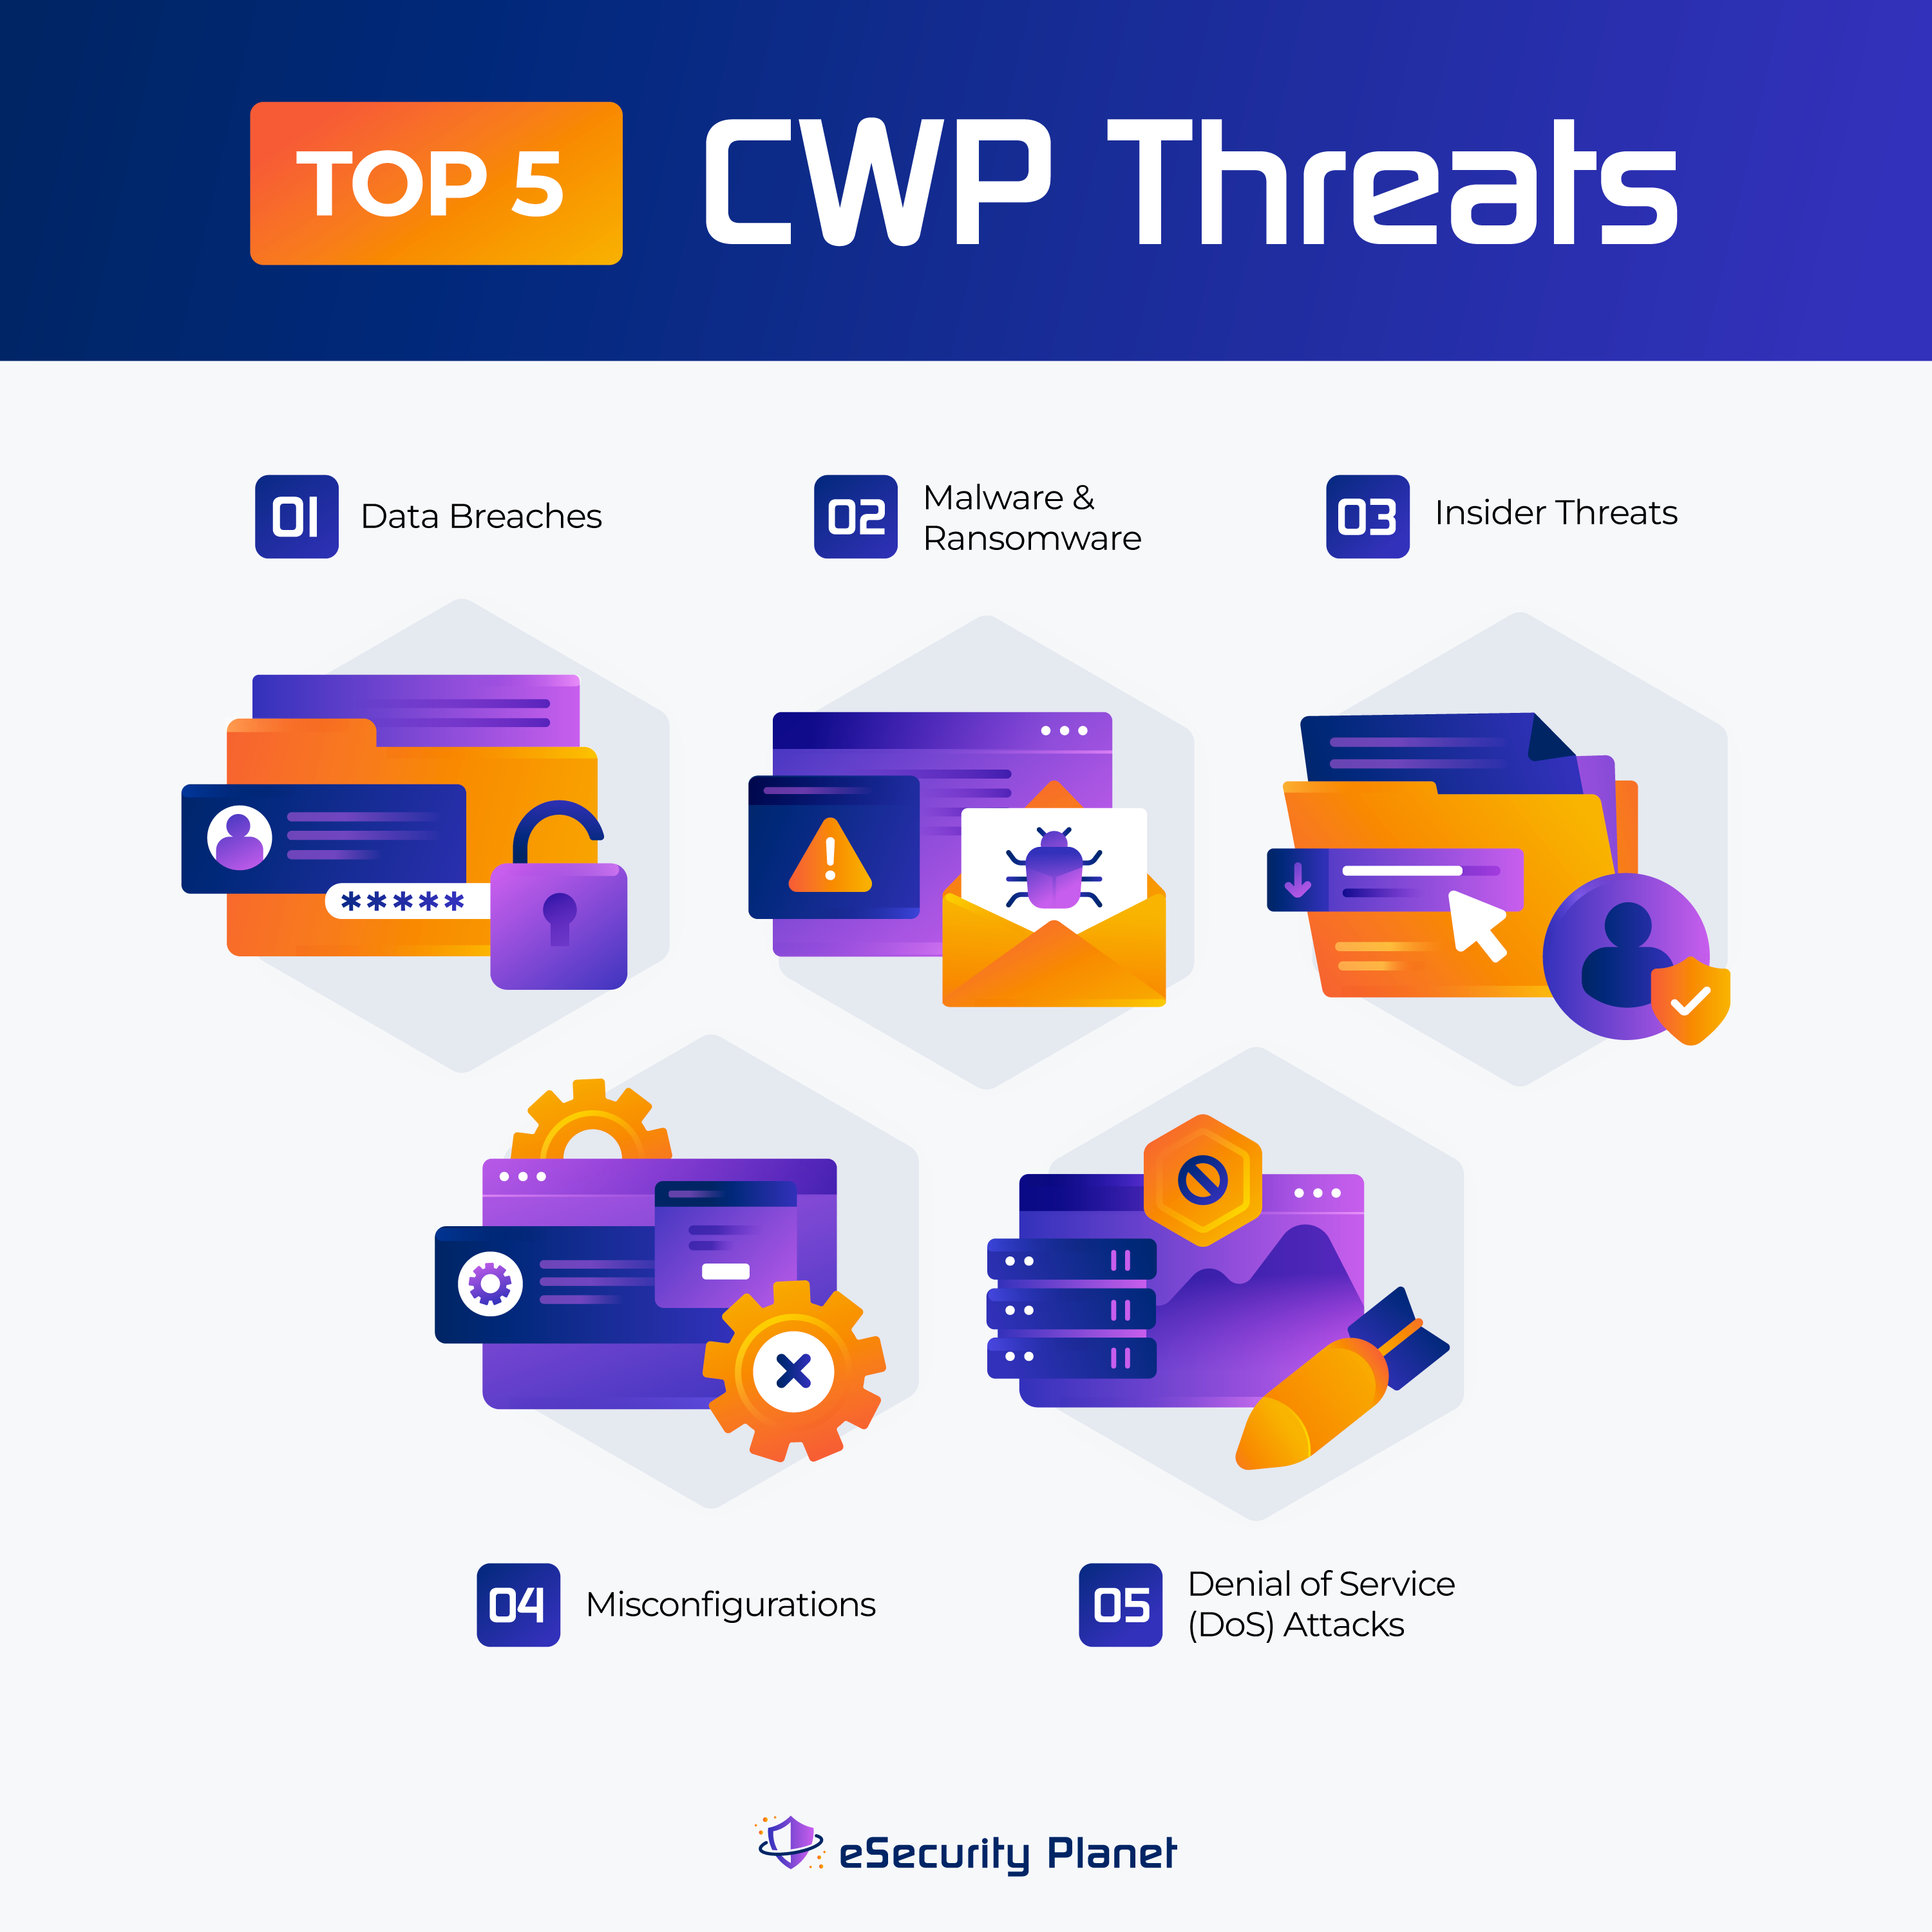 Top 5 CWP Threats infographic by eSecurity Planet.